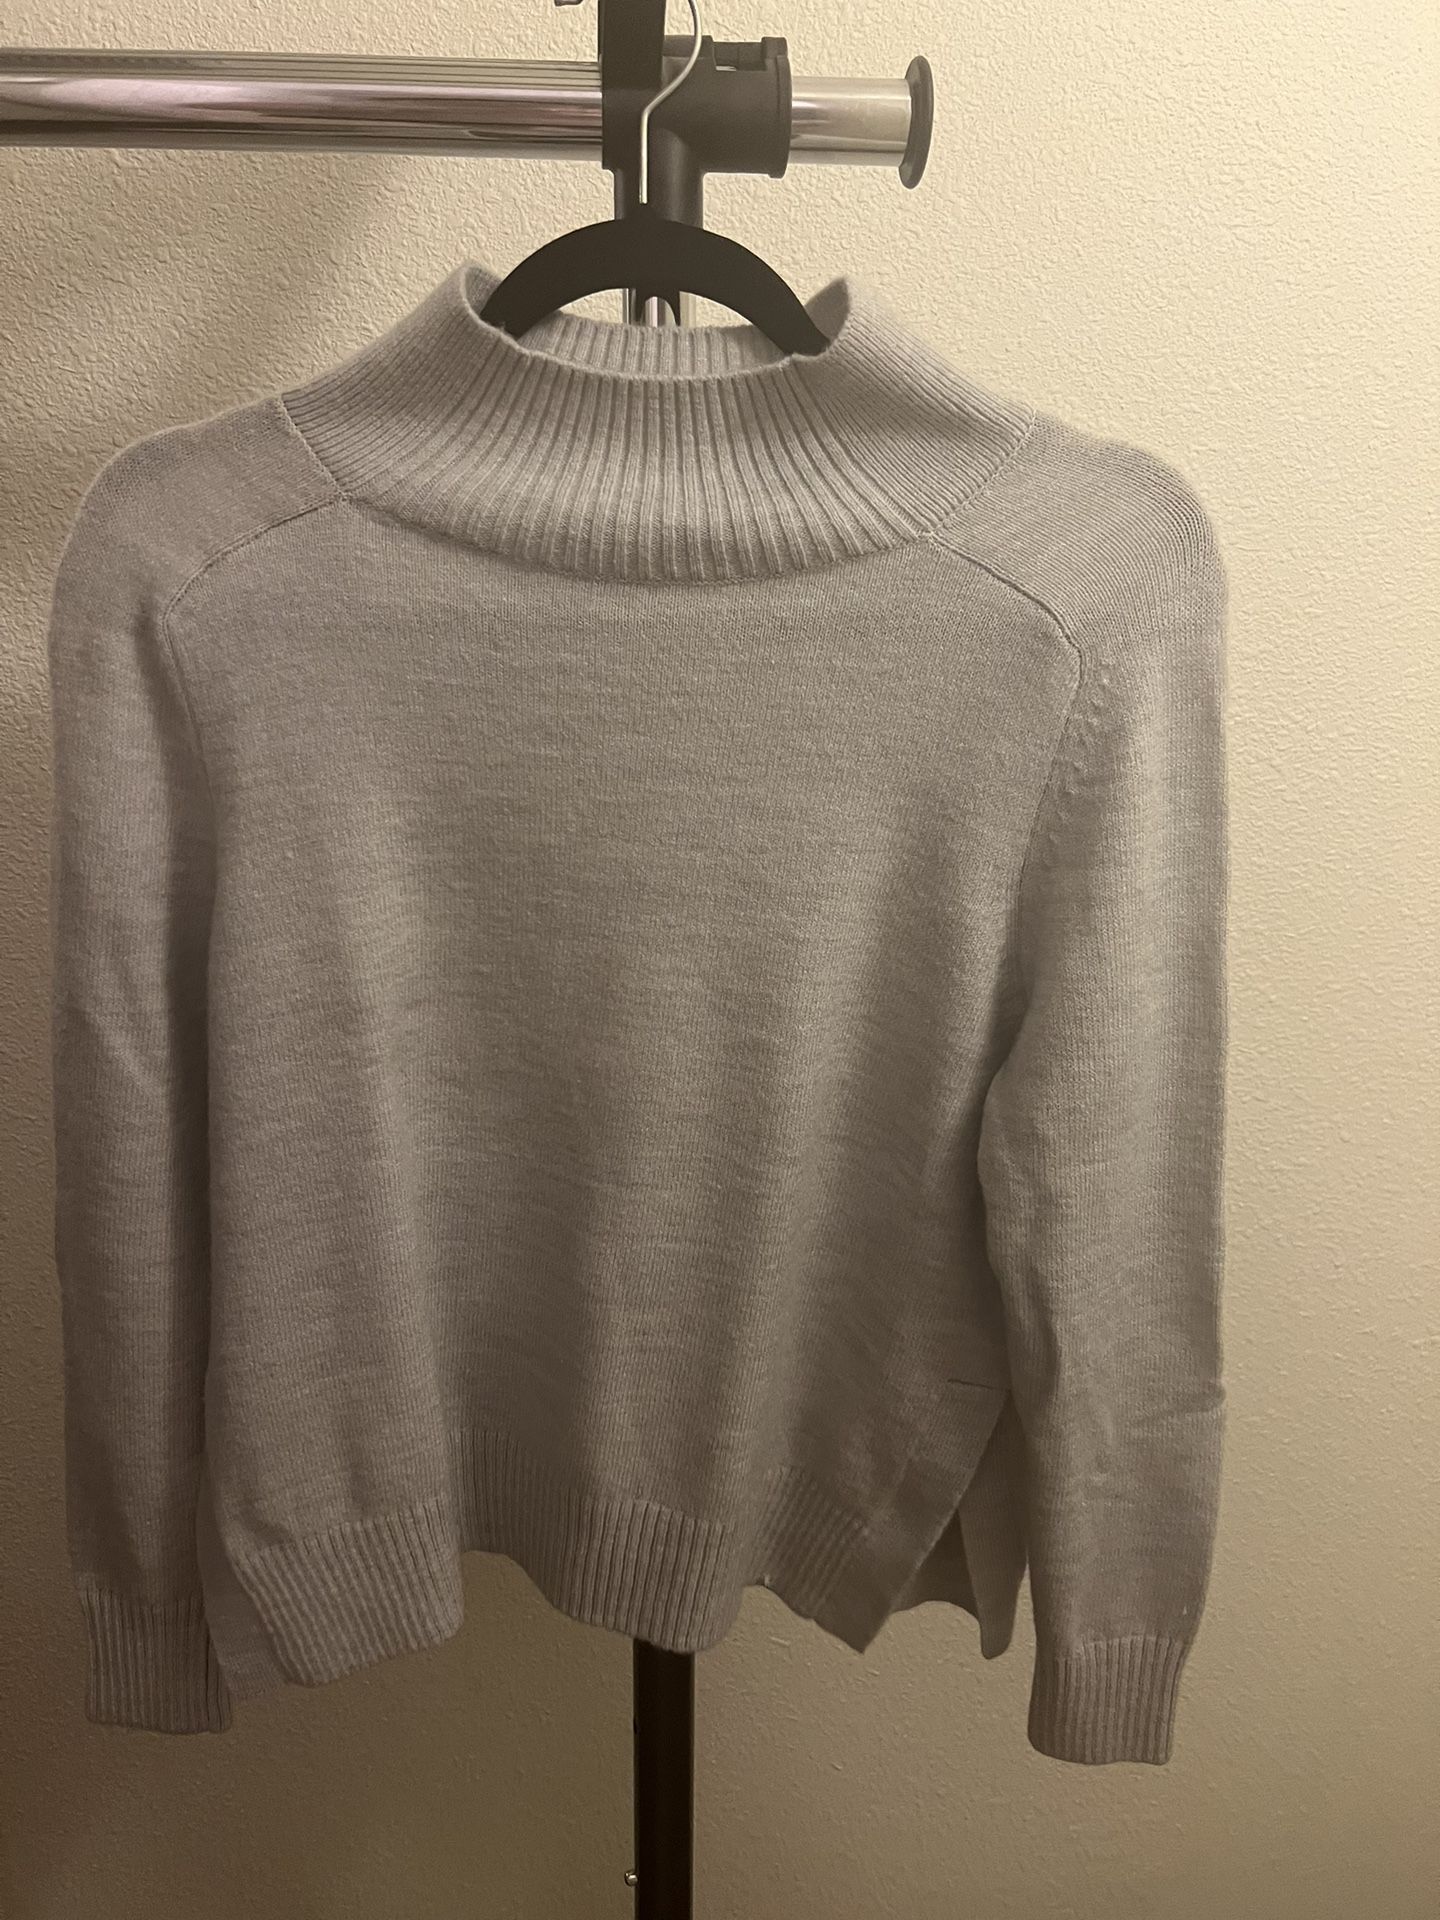 Banana Republic Grey Pullover Sweater - Women's Small - New Without Tags